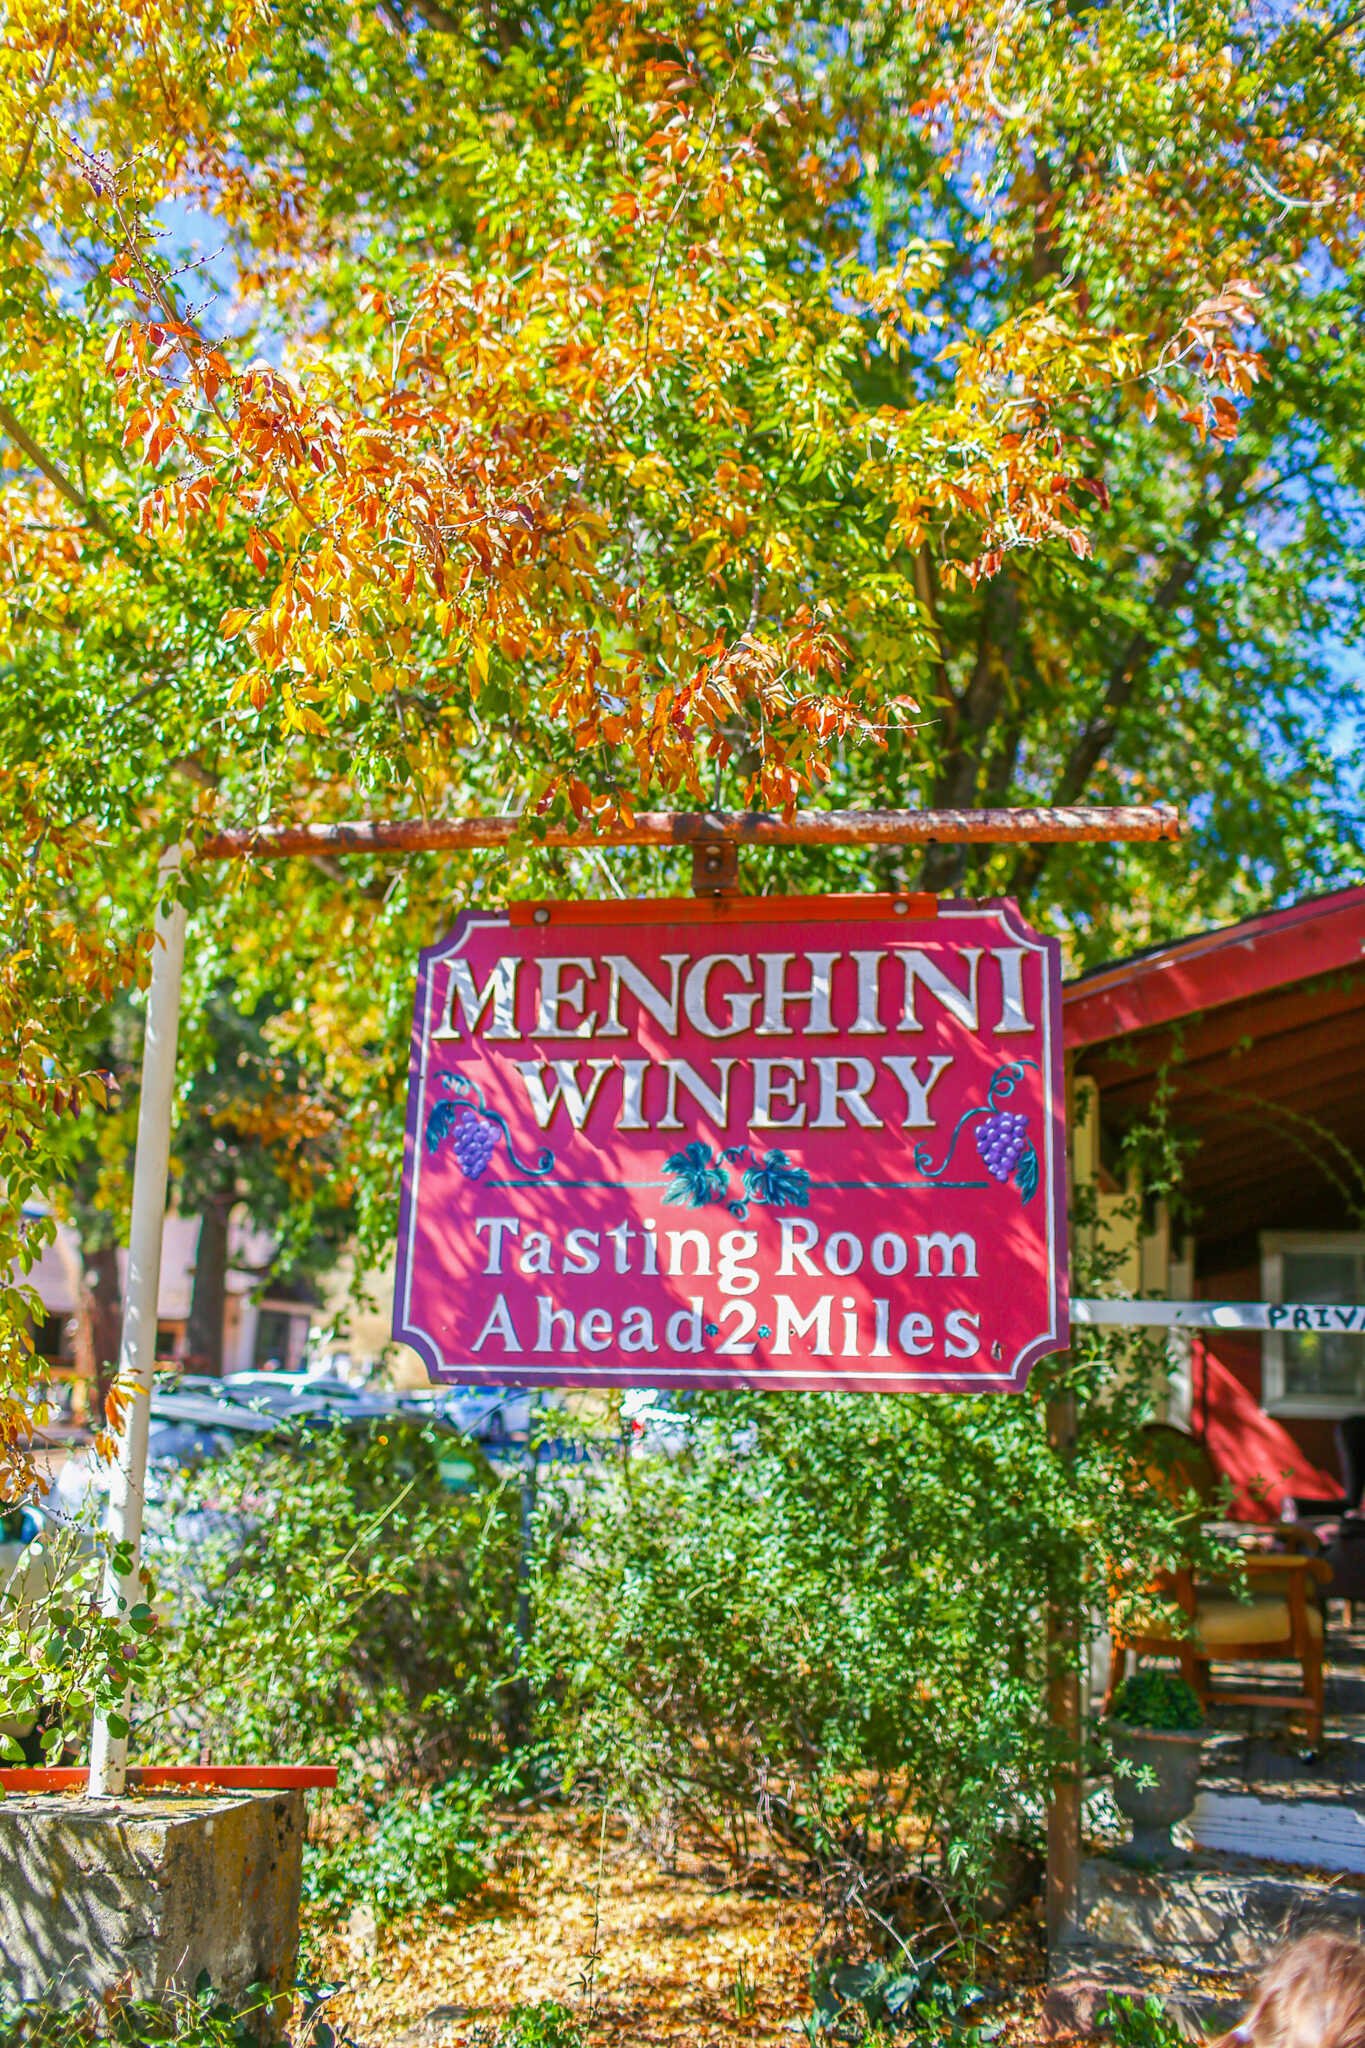 The Complete Travel Guide to Julian, California - Menghini Winery Tasting Room.